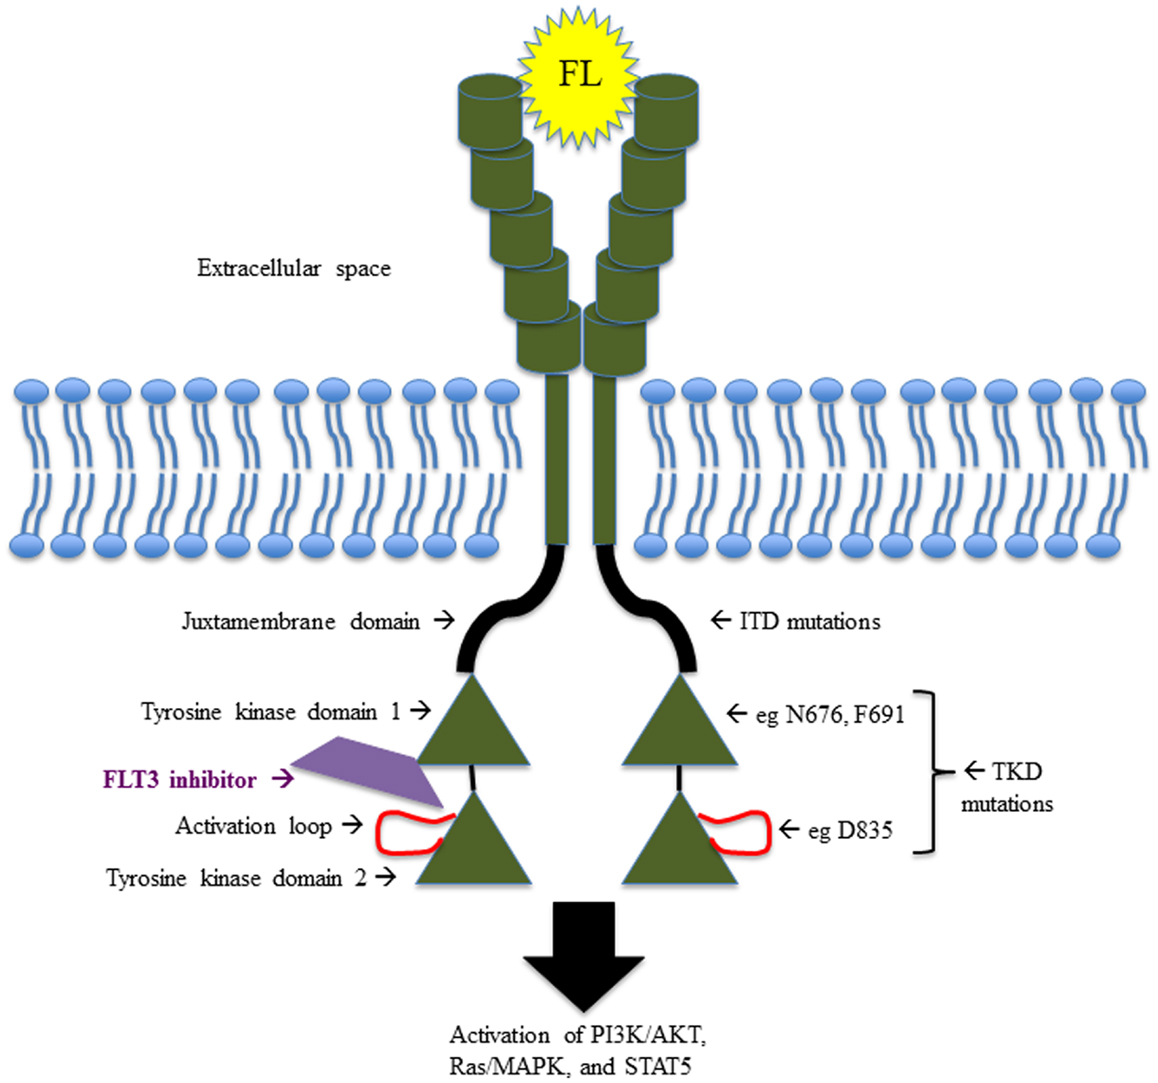 The structure of FLT3.